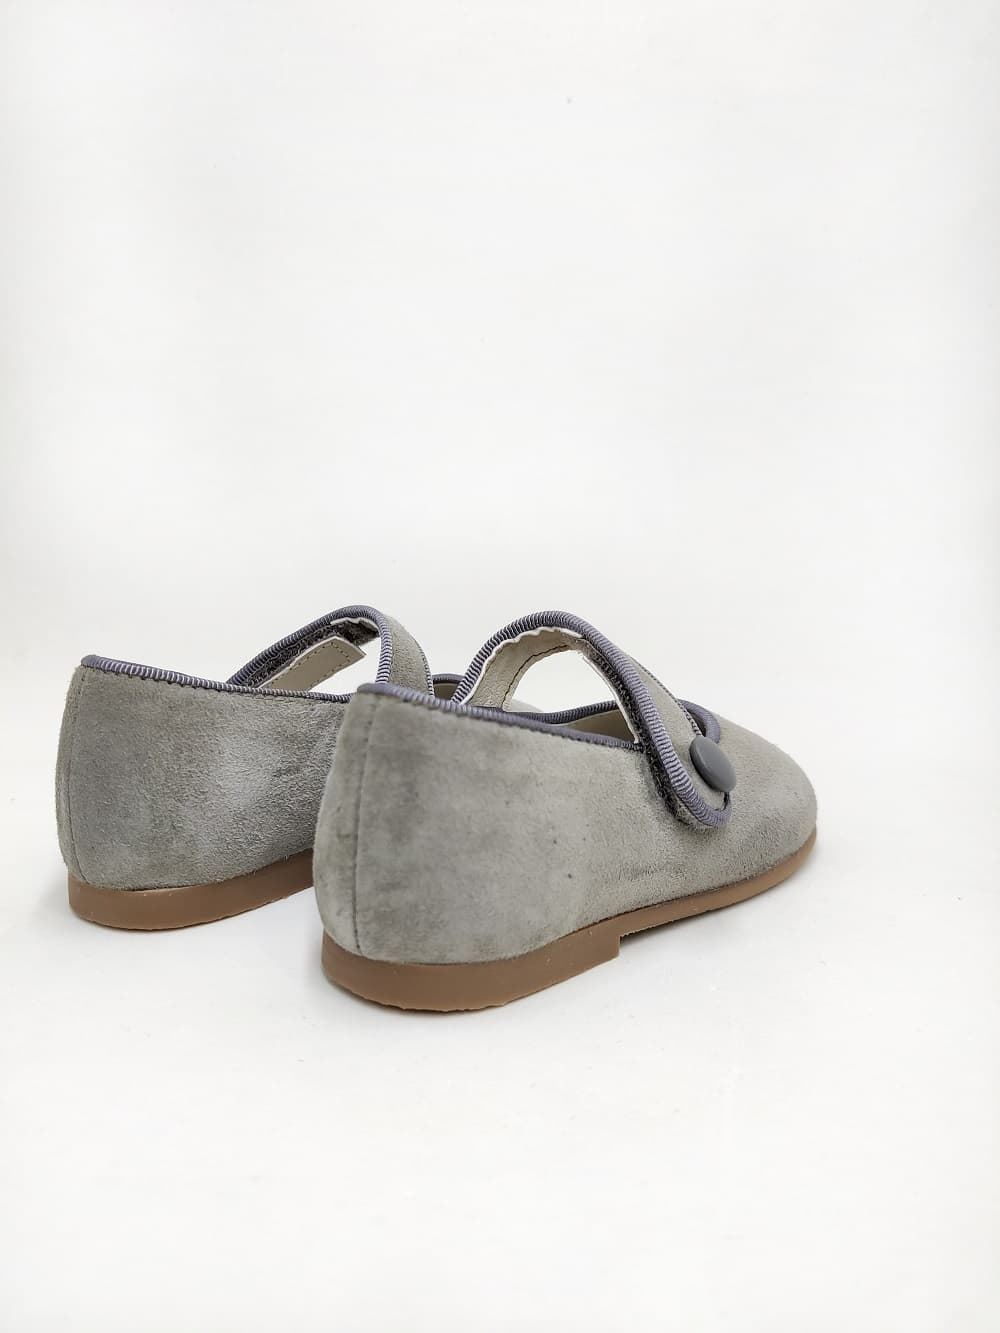 Pirufin (Piruflex) Mary Janes for baby girls in Gray suede - Image 3